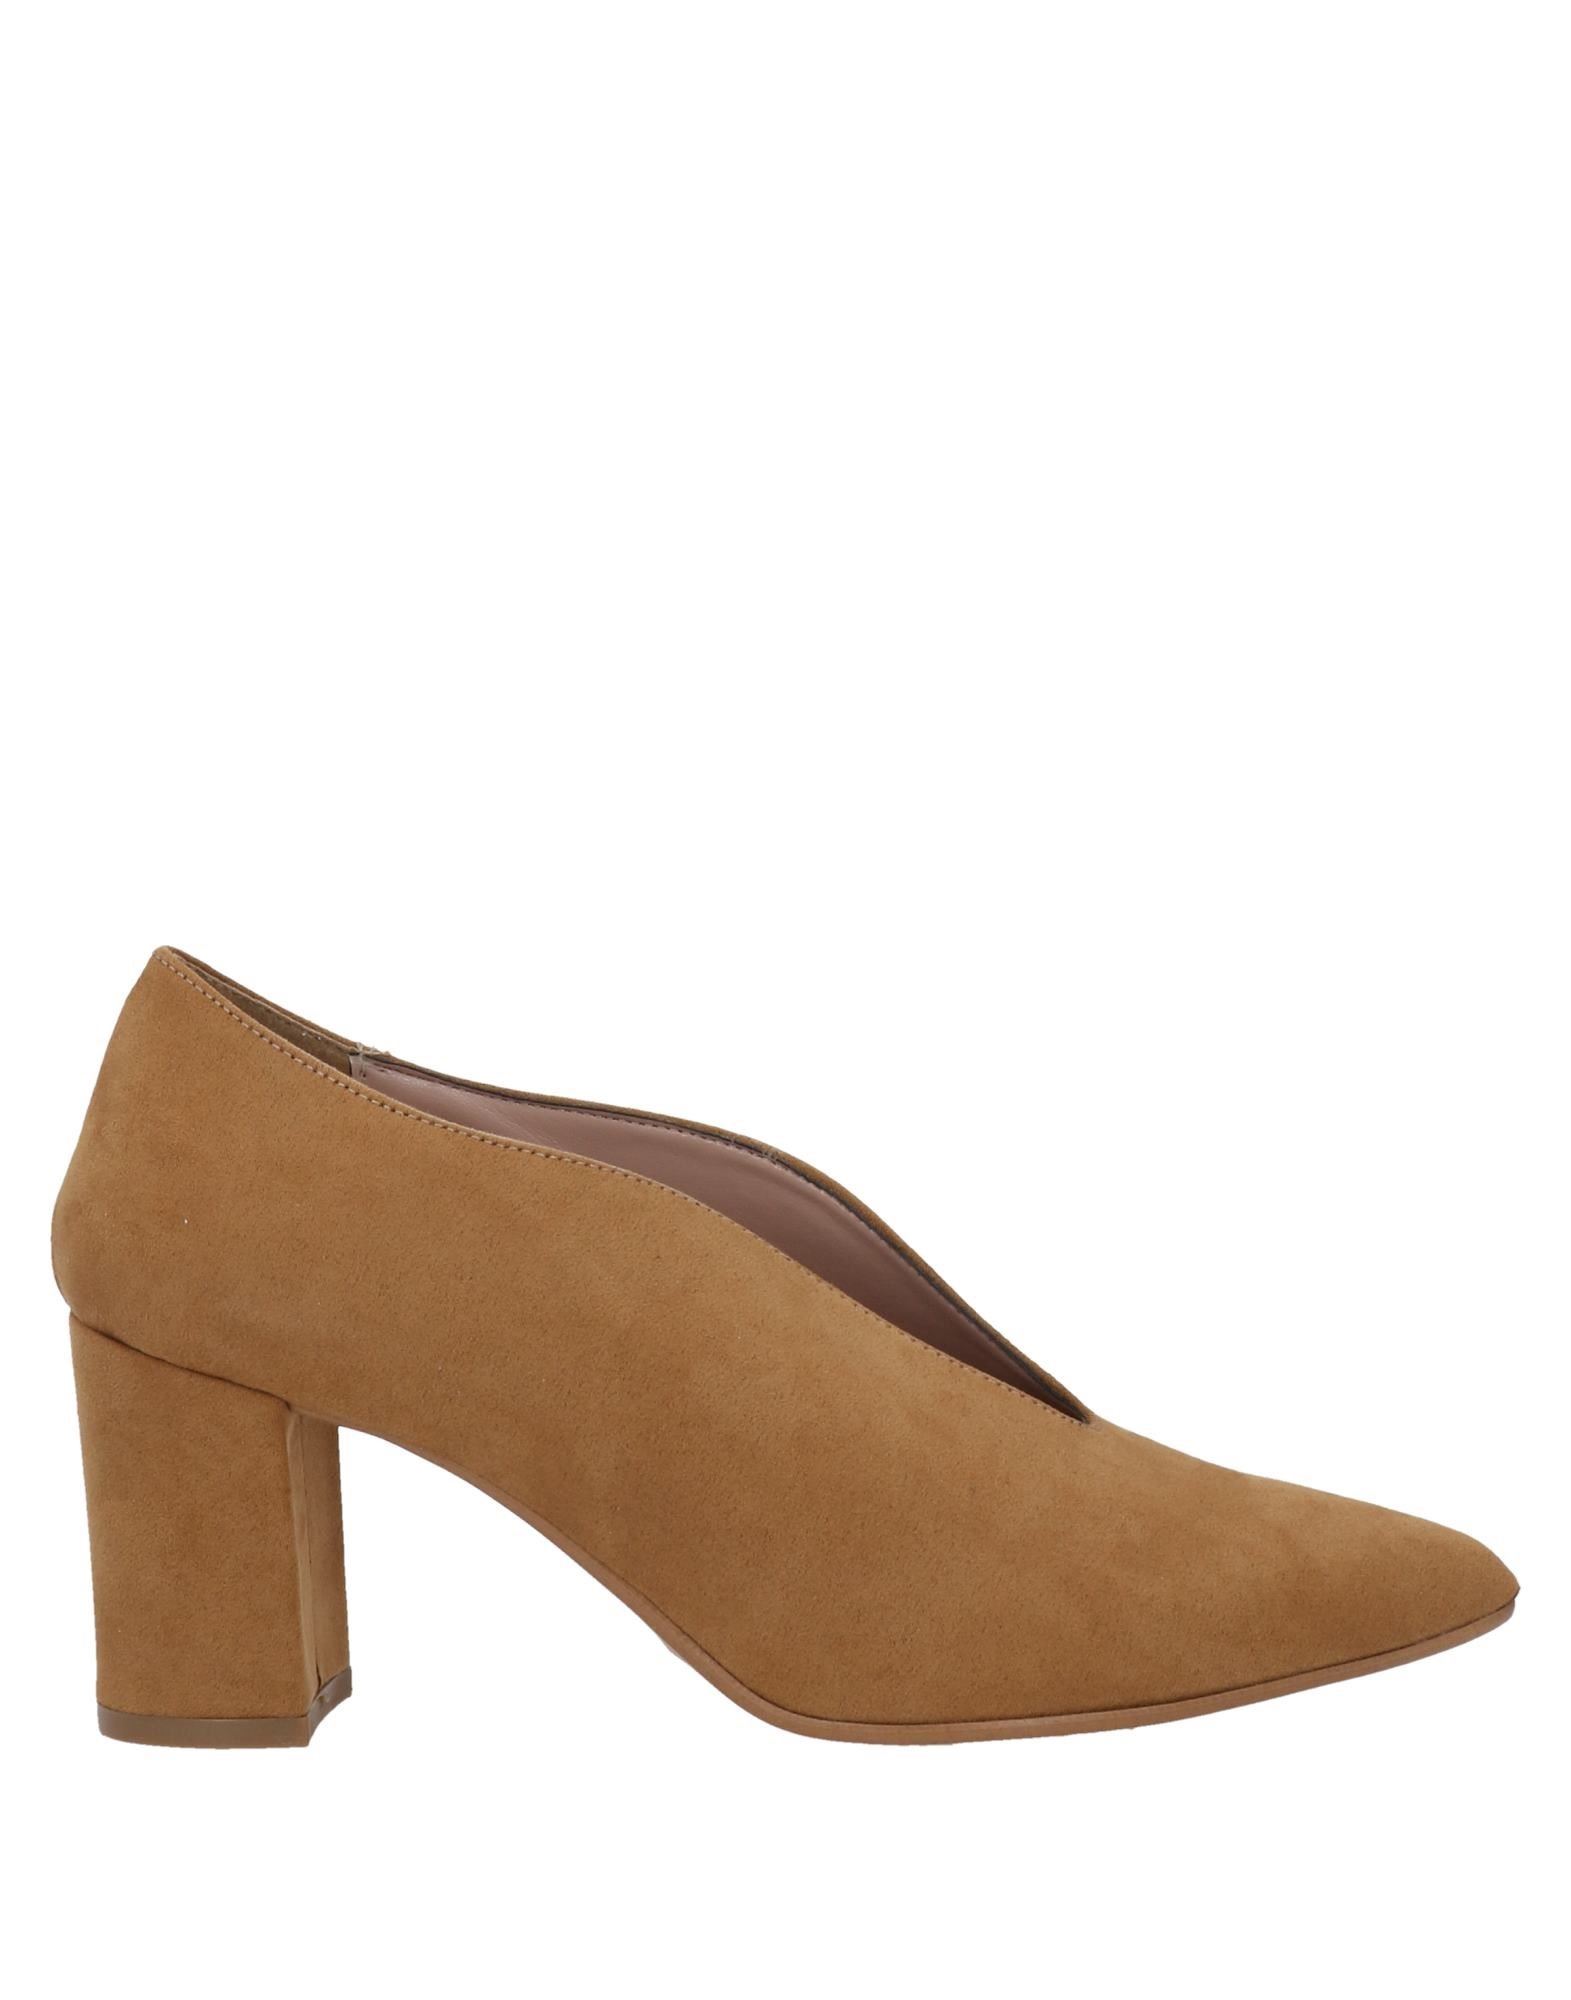 Tsd12 Ankle Boots In Sand